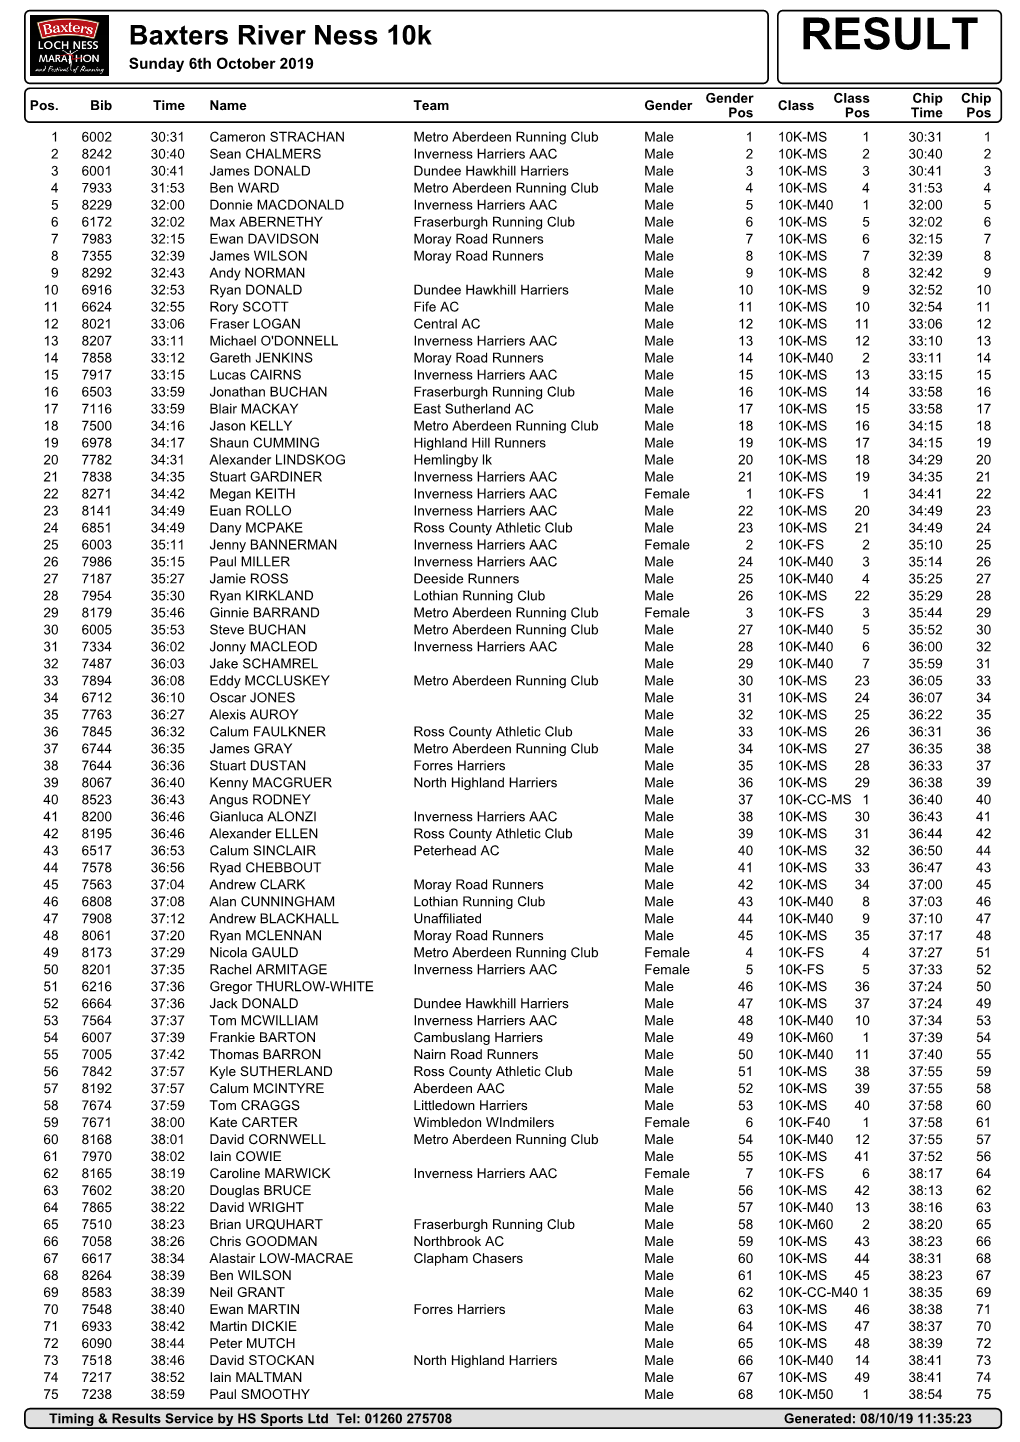 Baxters River Ness 10K RESULT Sunday 6Th October 2019